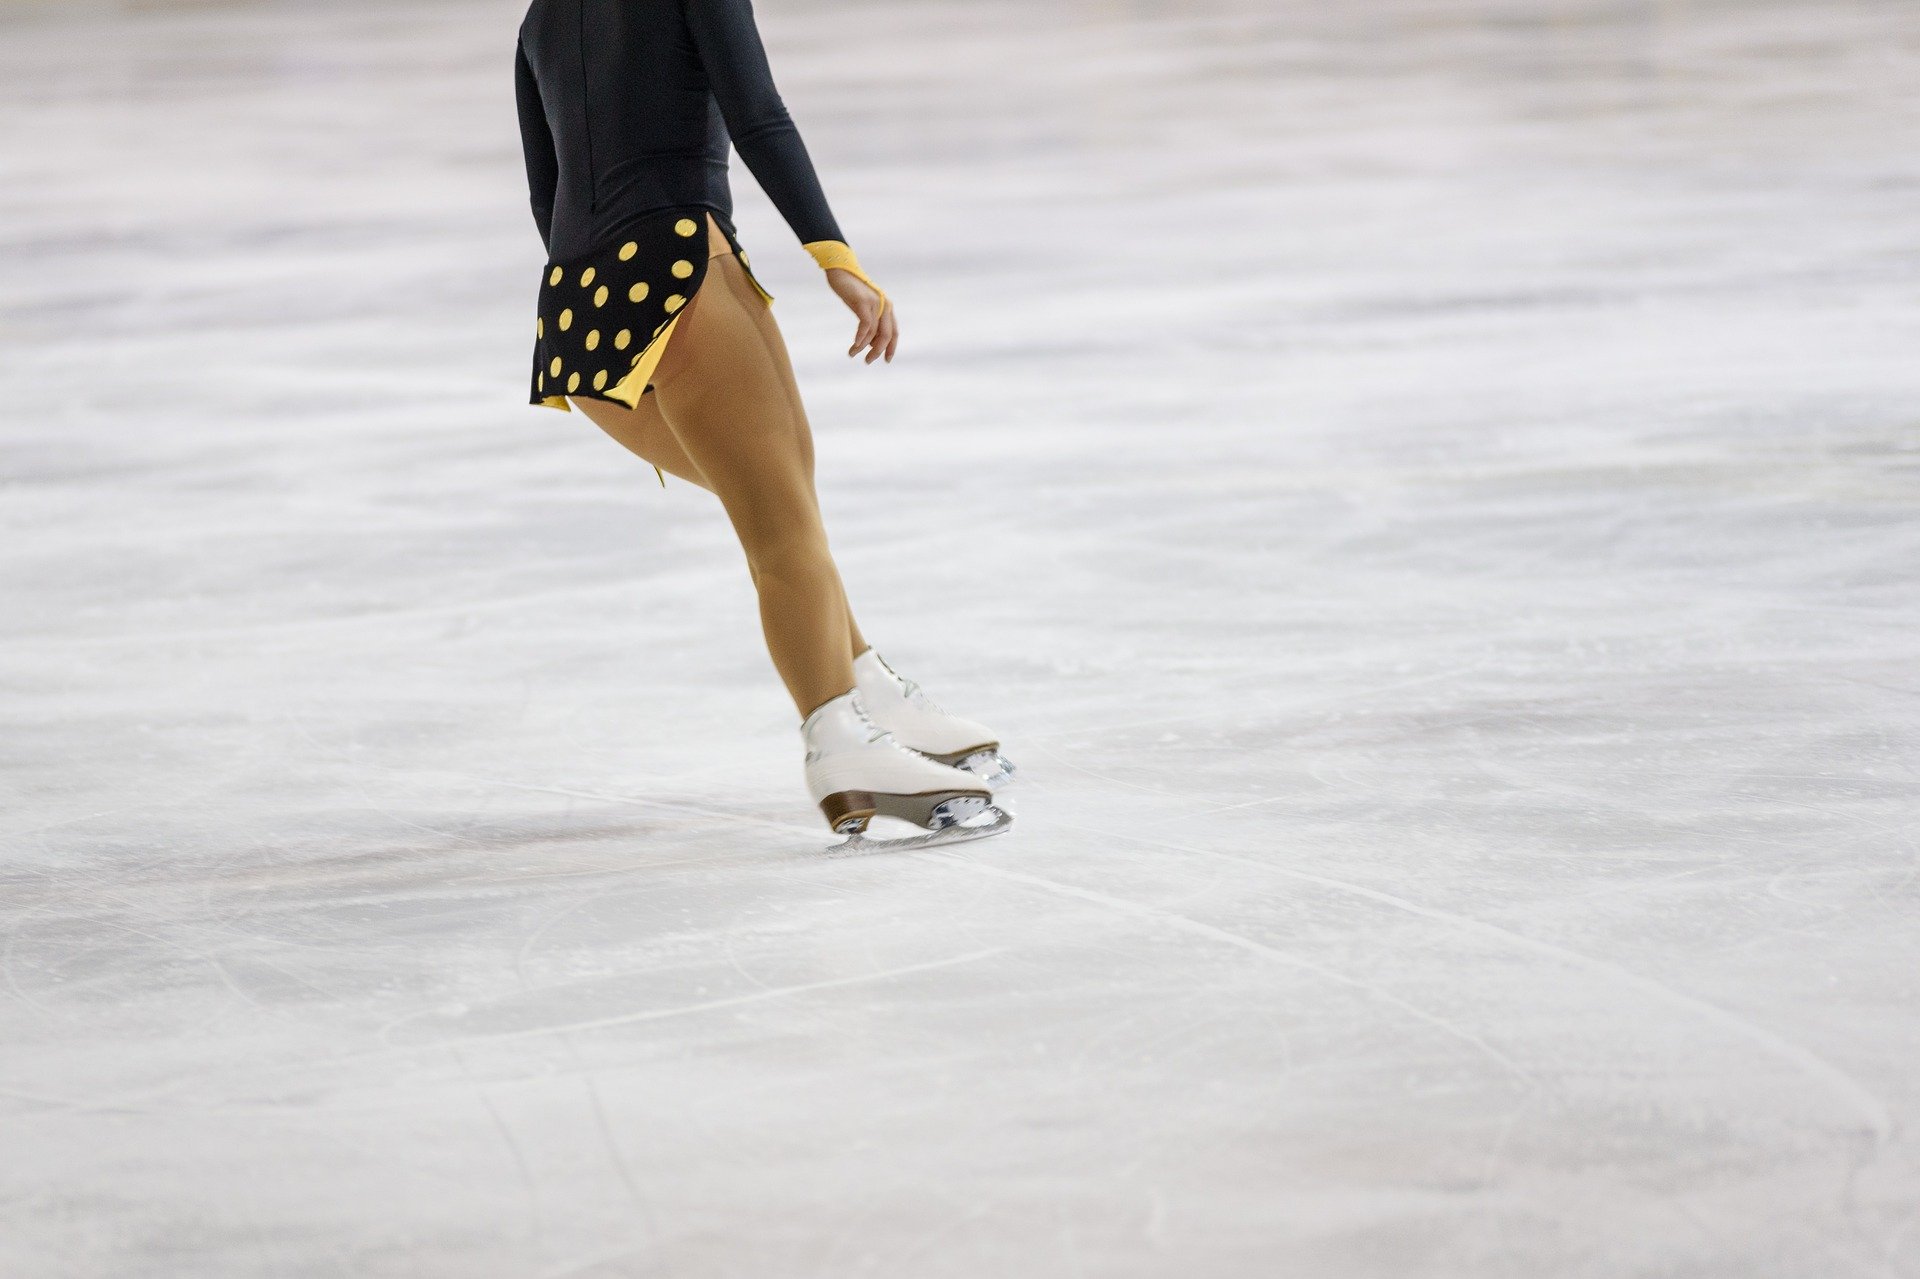 Pictured - A figure skater during the winter sport competition | Source: Pixabay